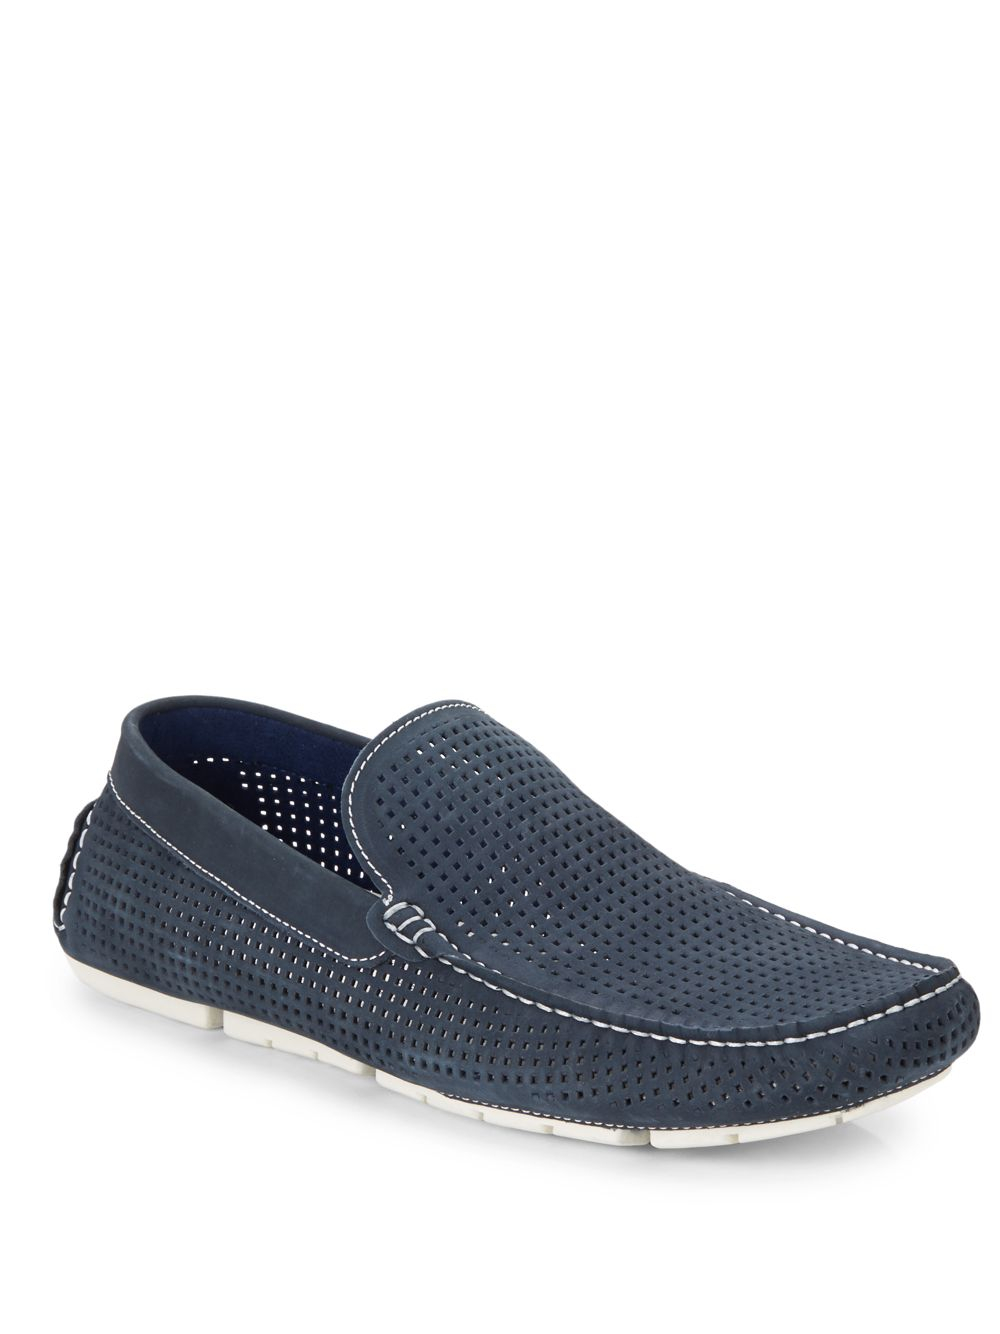 Steve madden Ditmarz Perforated Suede Loafers in Blue for Men | Lyst